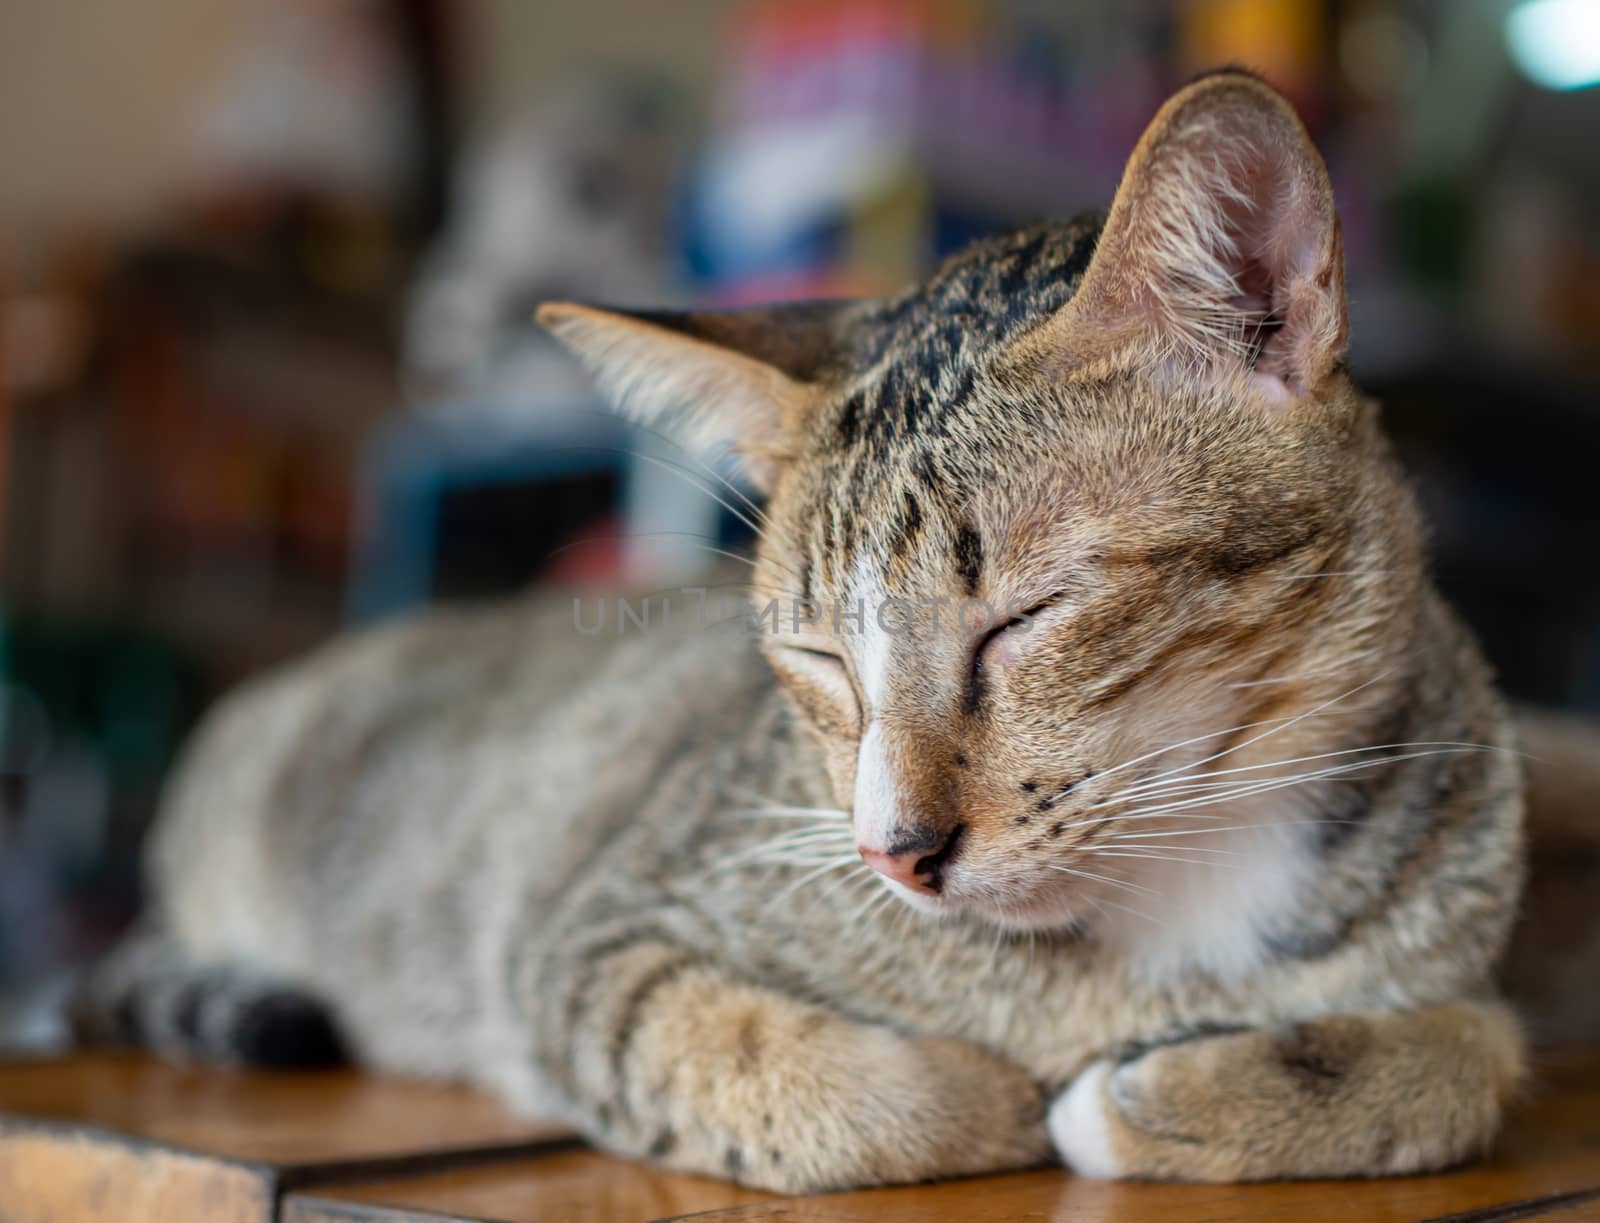 A cat sleeping on a wooden bed by Unimages2527